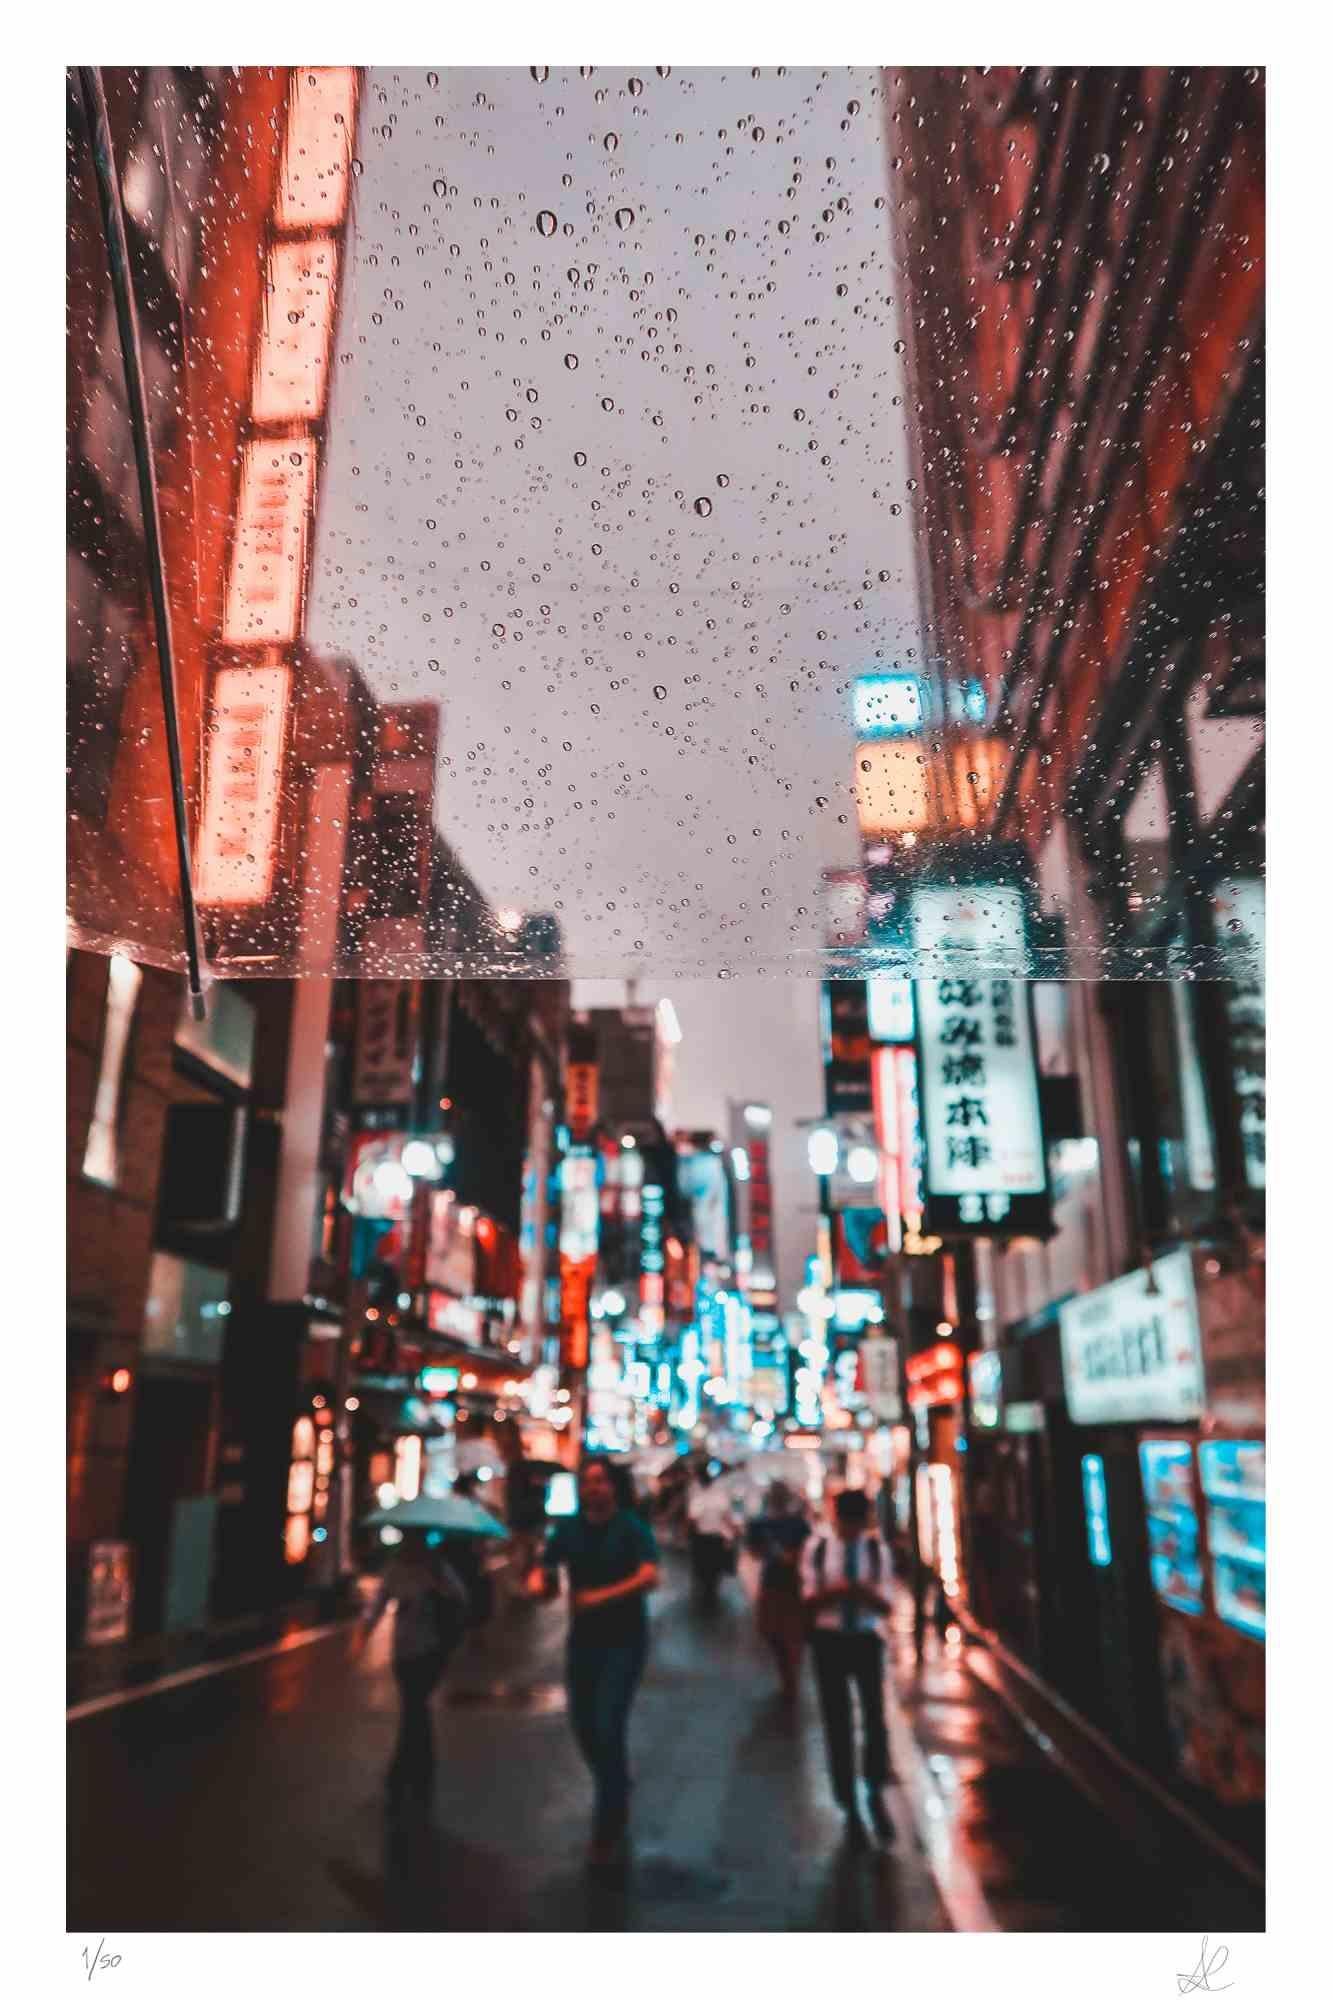 Tokyo is a photograph taken by Amanda Ludovisi in 2019.

It represents a street in a rainy evening in the center of Tokyo. This is a giclée print on Canson Baryta Matt paper. Limited edition of 50 copies.

Monogrammed on the lower right and numbered